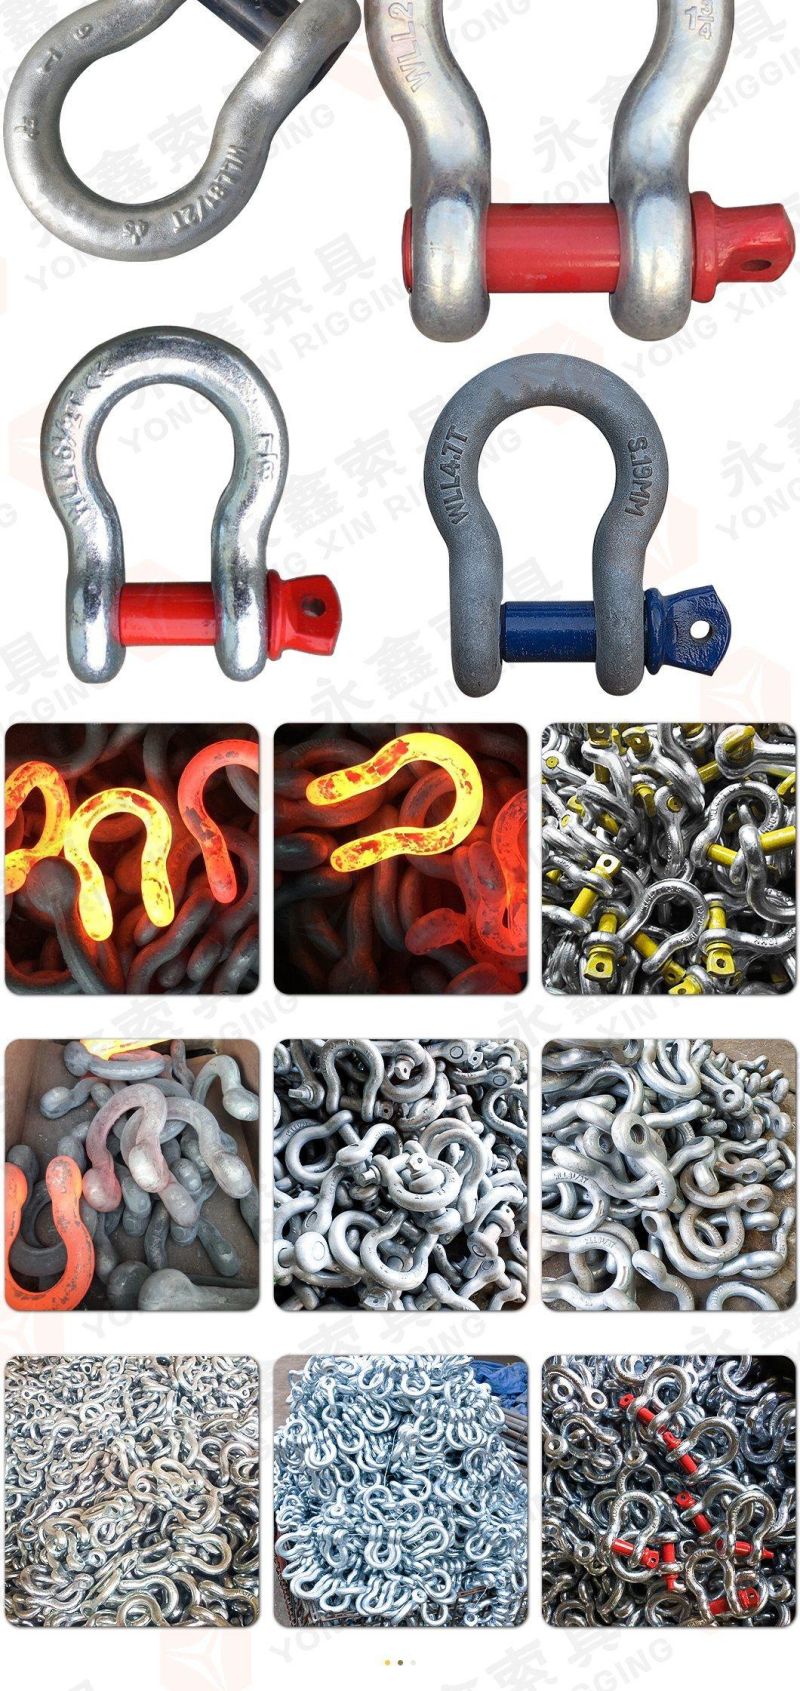 4.75ton 6.5ton Paint Screw Pin G209 Bow Shackle for Lifting